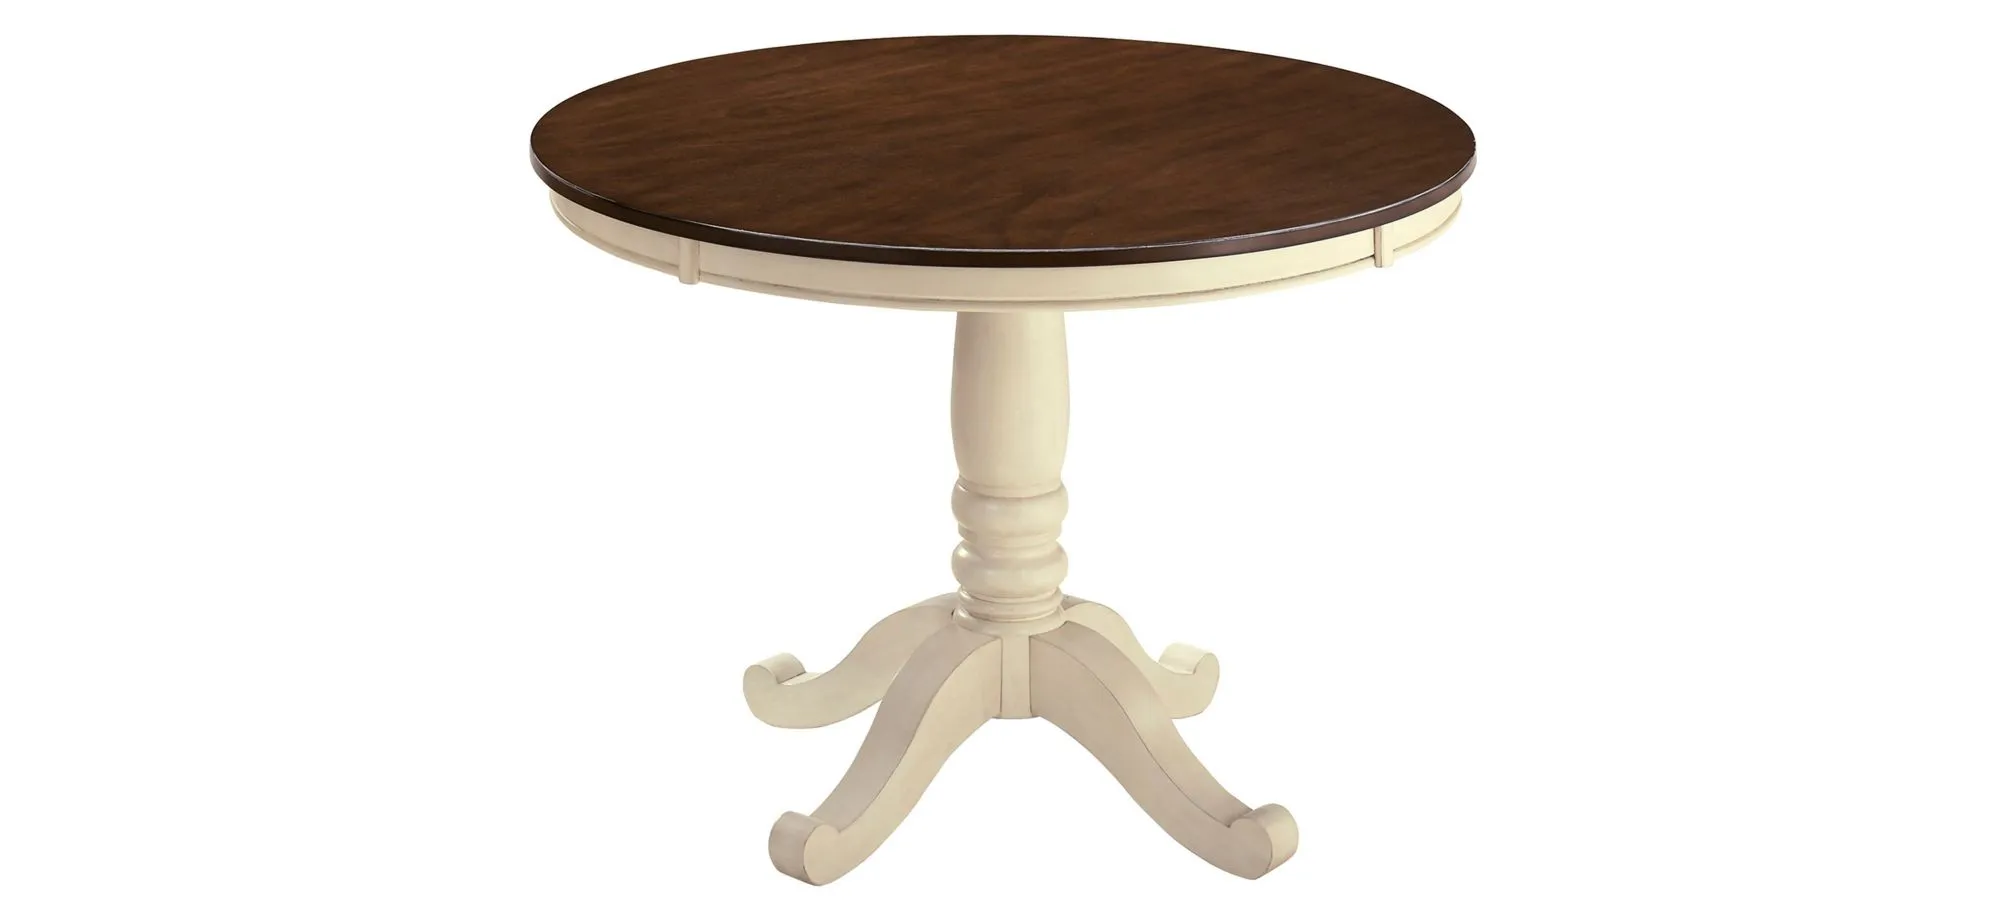 Leland Dining Table in Cottage White / Brown by Ashley Furniture